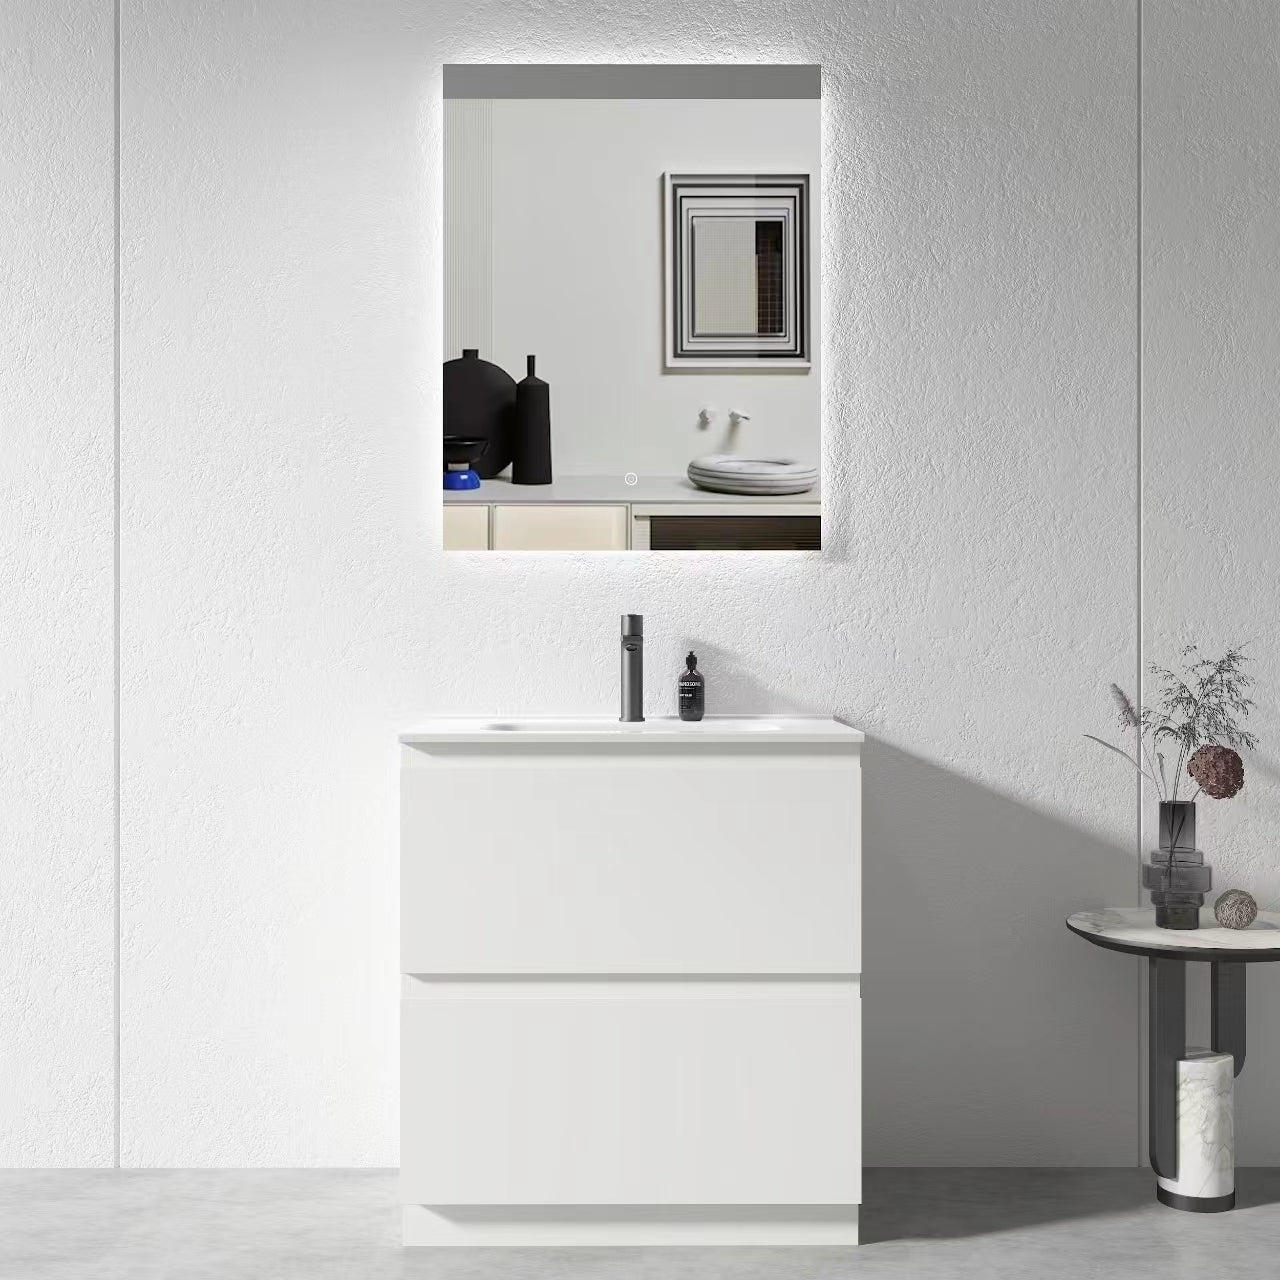 750mm Plywood Gloss White Floor Standing Vanity Unit With Ceramic Basin